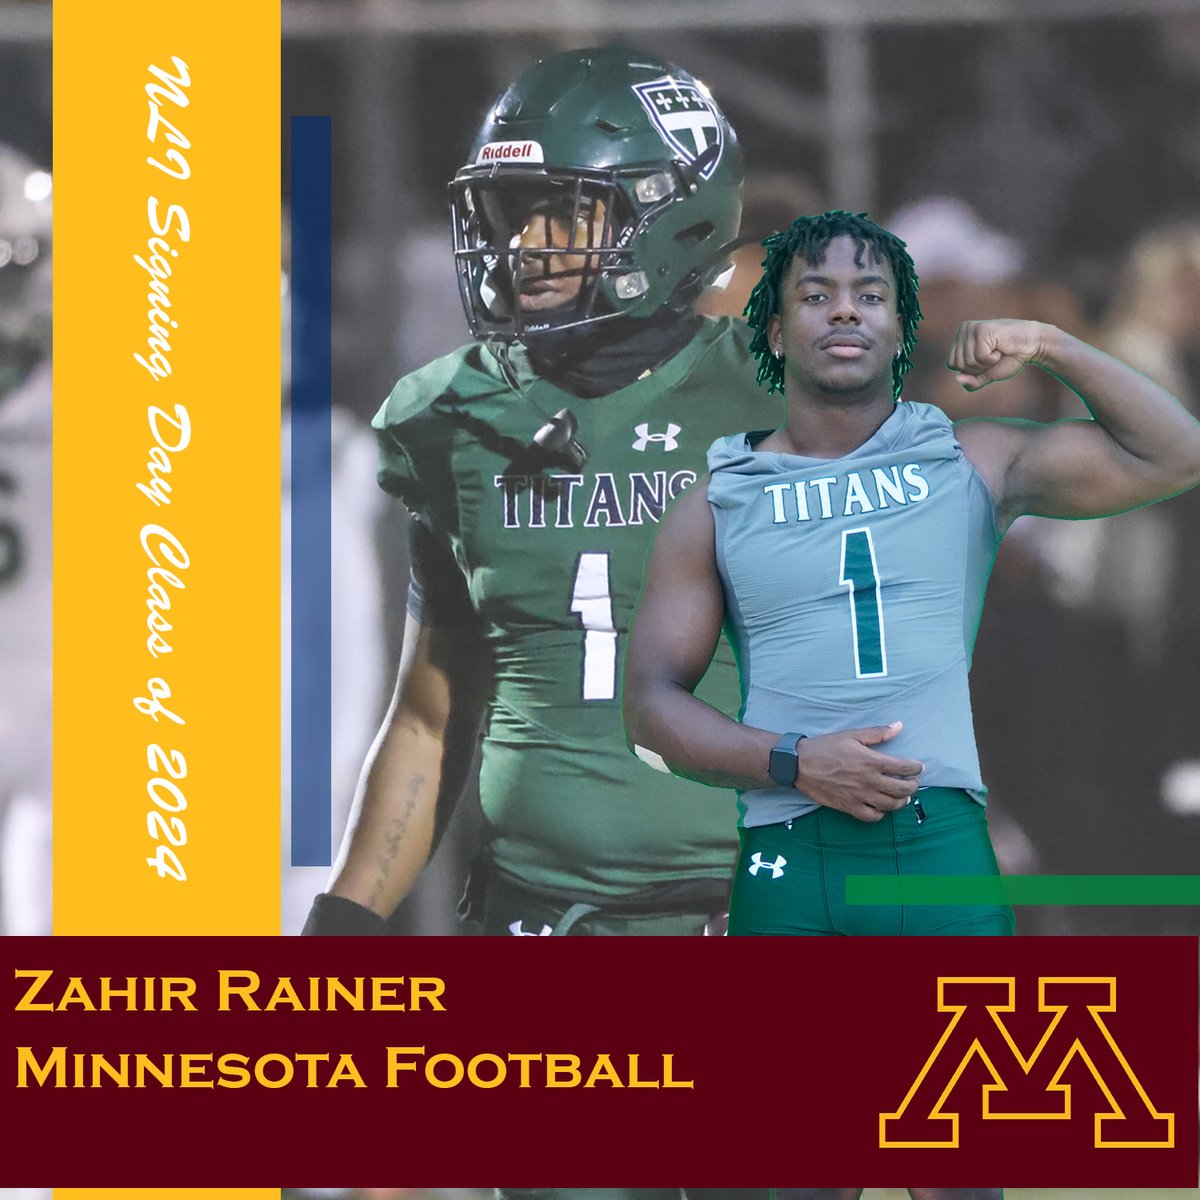 Happy winter NLI signing day for Zahir Rainer! He's headed to continue his football career at @GopherFootball Congratulations Z, Titan nation is excited to watch you at the next level!